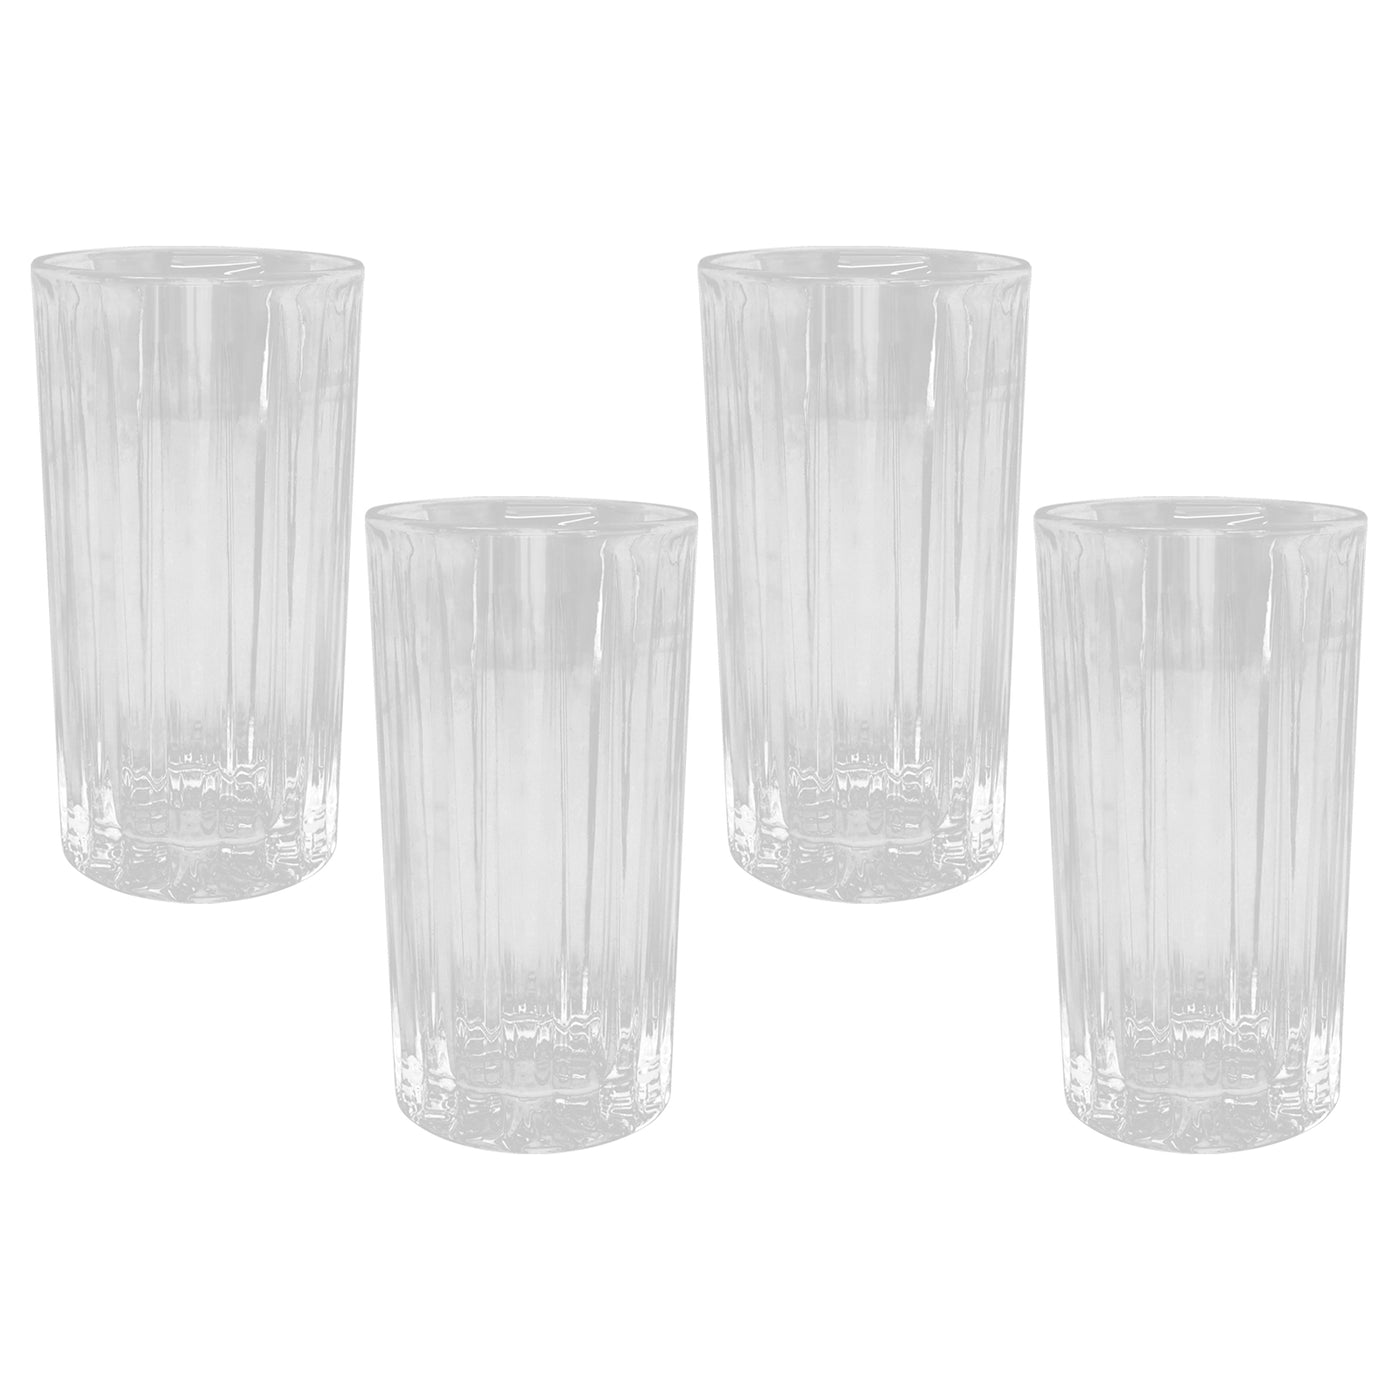 Set of 4 Clear Highball Drinking Glasses Kitchen Glassware Perfect for Party, Gin and Tonic Glasses, Cocktail Glasses, Juice Tumblers & Water Glasses